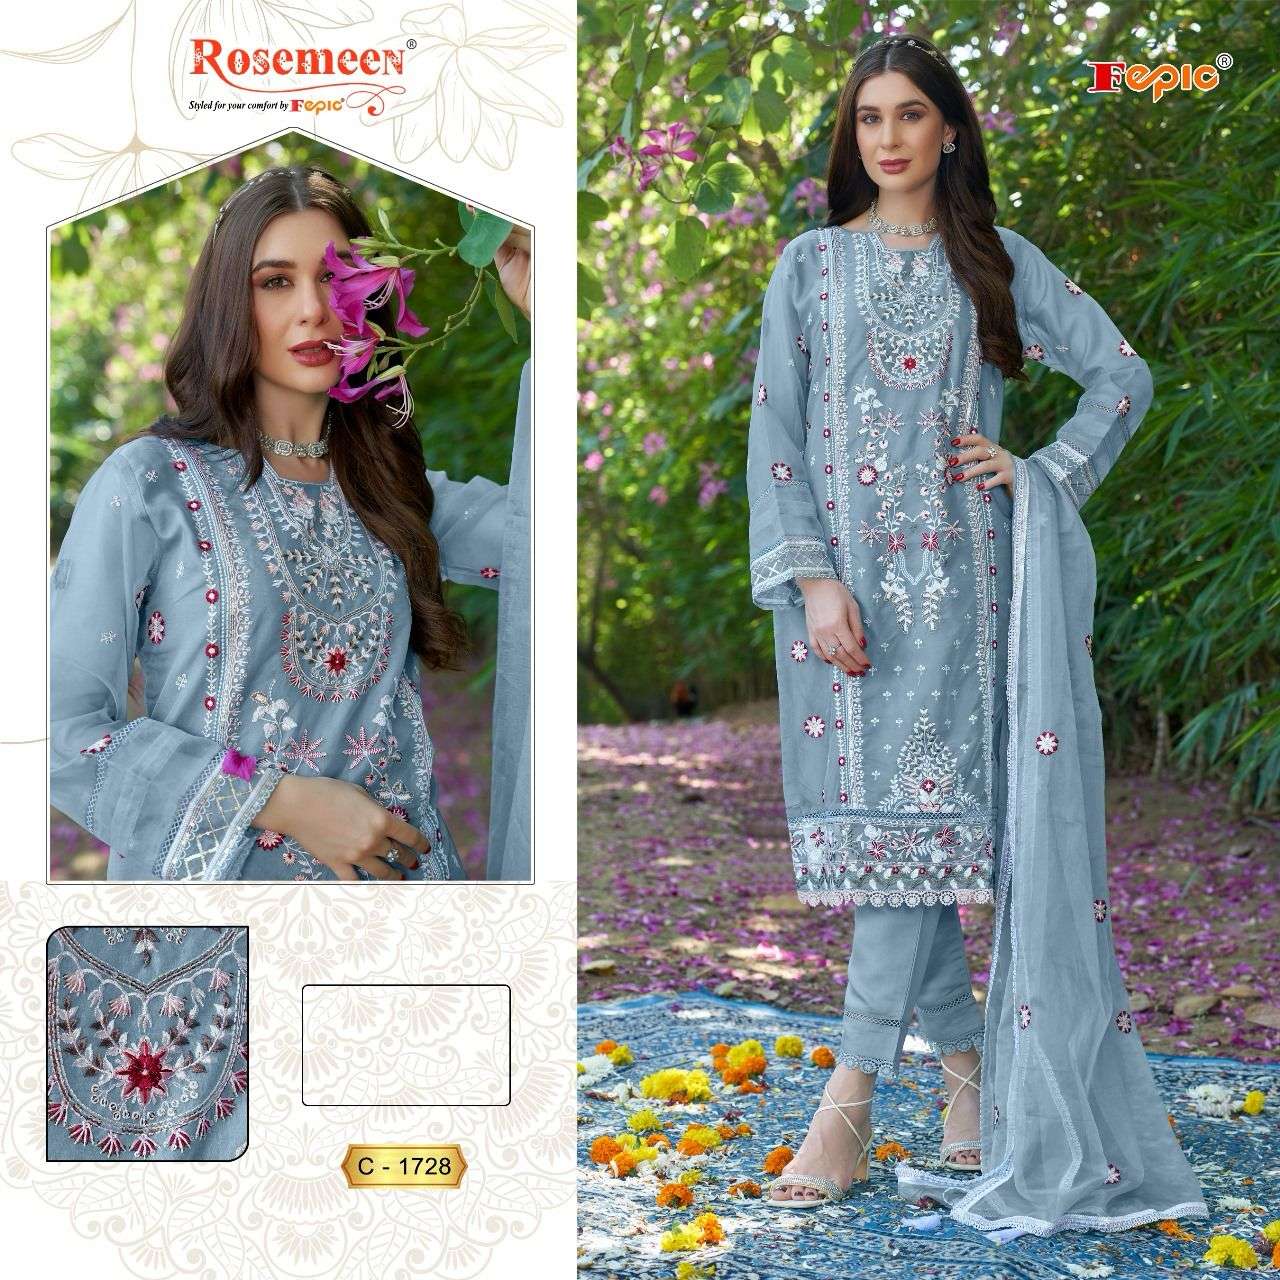 ROSEMEEN C-1728 COLOURS BY FEPIC DESIGNER ORGANZA EMBROIDERY DRESSES